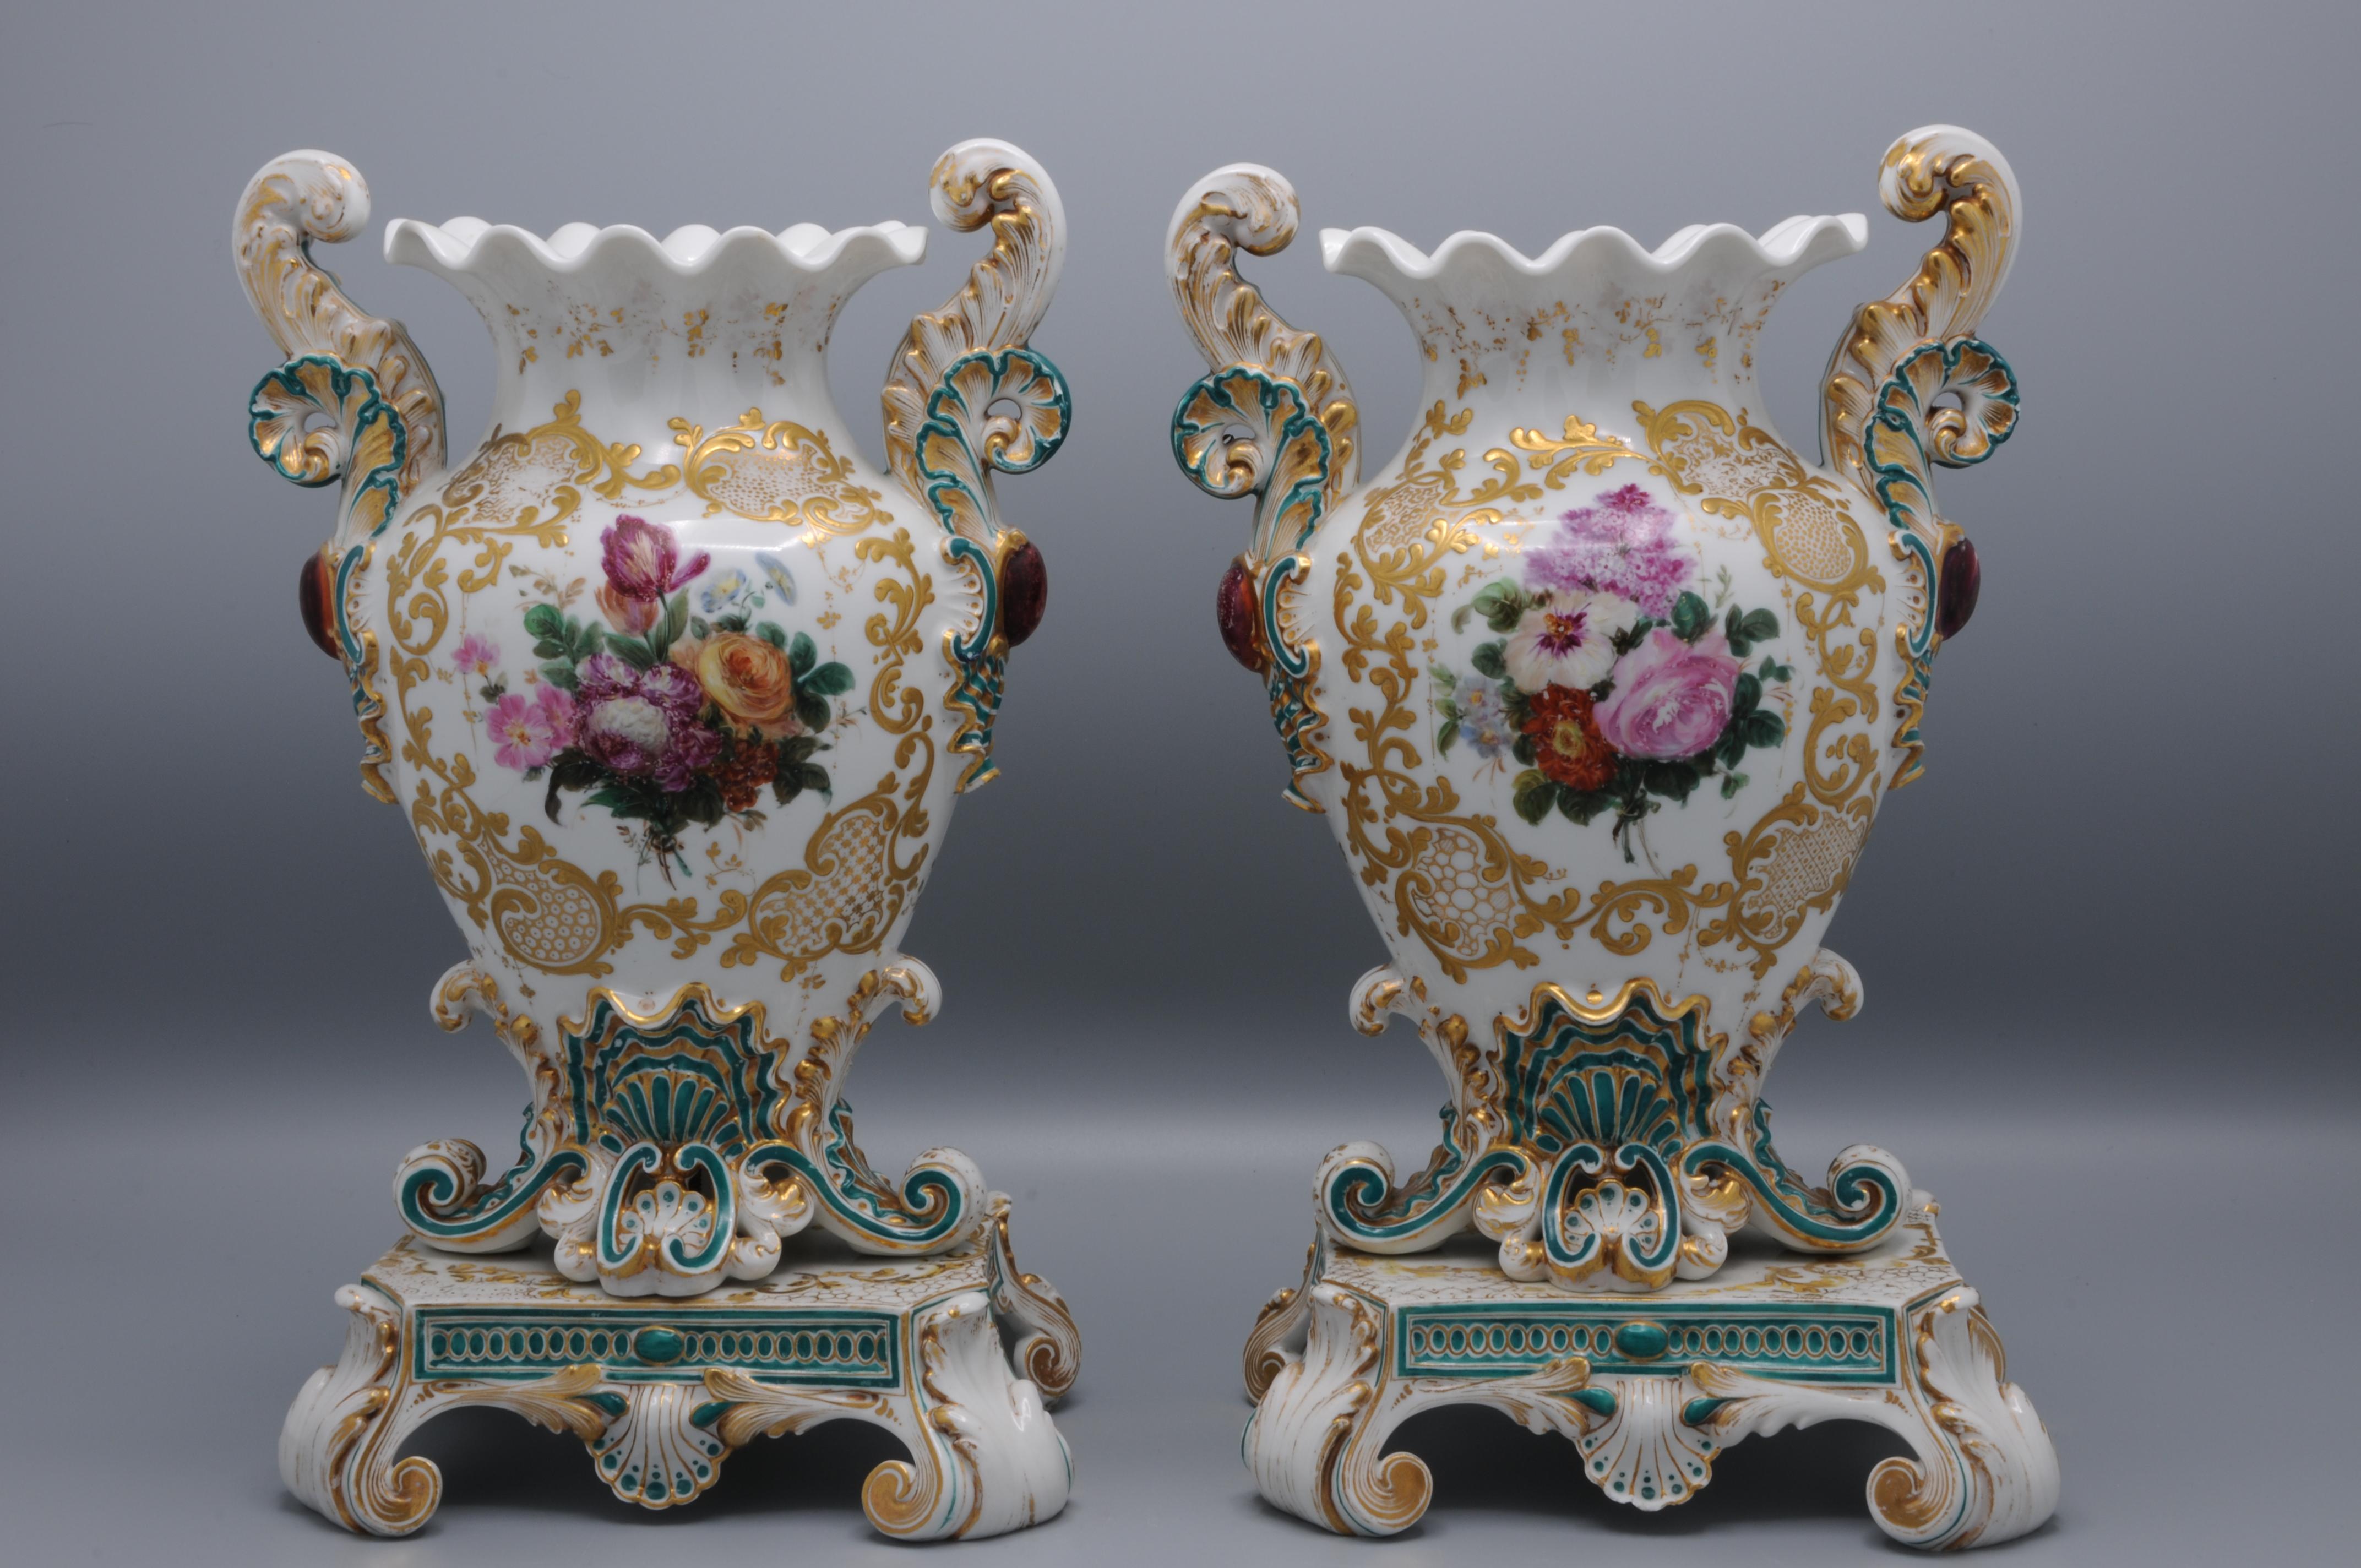 Very ornate pair of French romantic vases by Jacob Petit, Paris 
Baluster form, heavy white porcelain vases on stands with floral sprays within a raised and gilt acanthus scoll and shell border continuing to outward scroll handles and raised on four